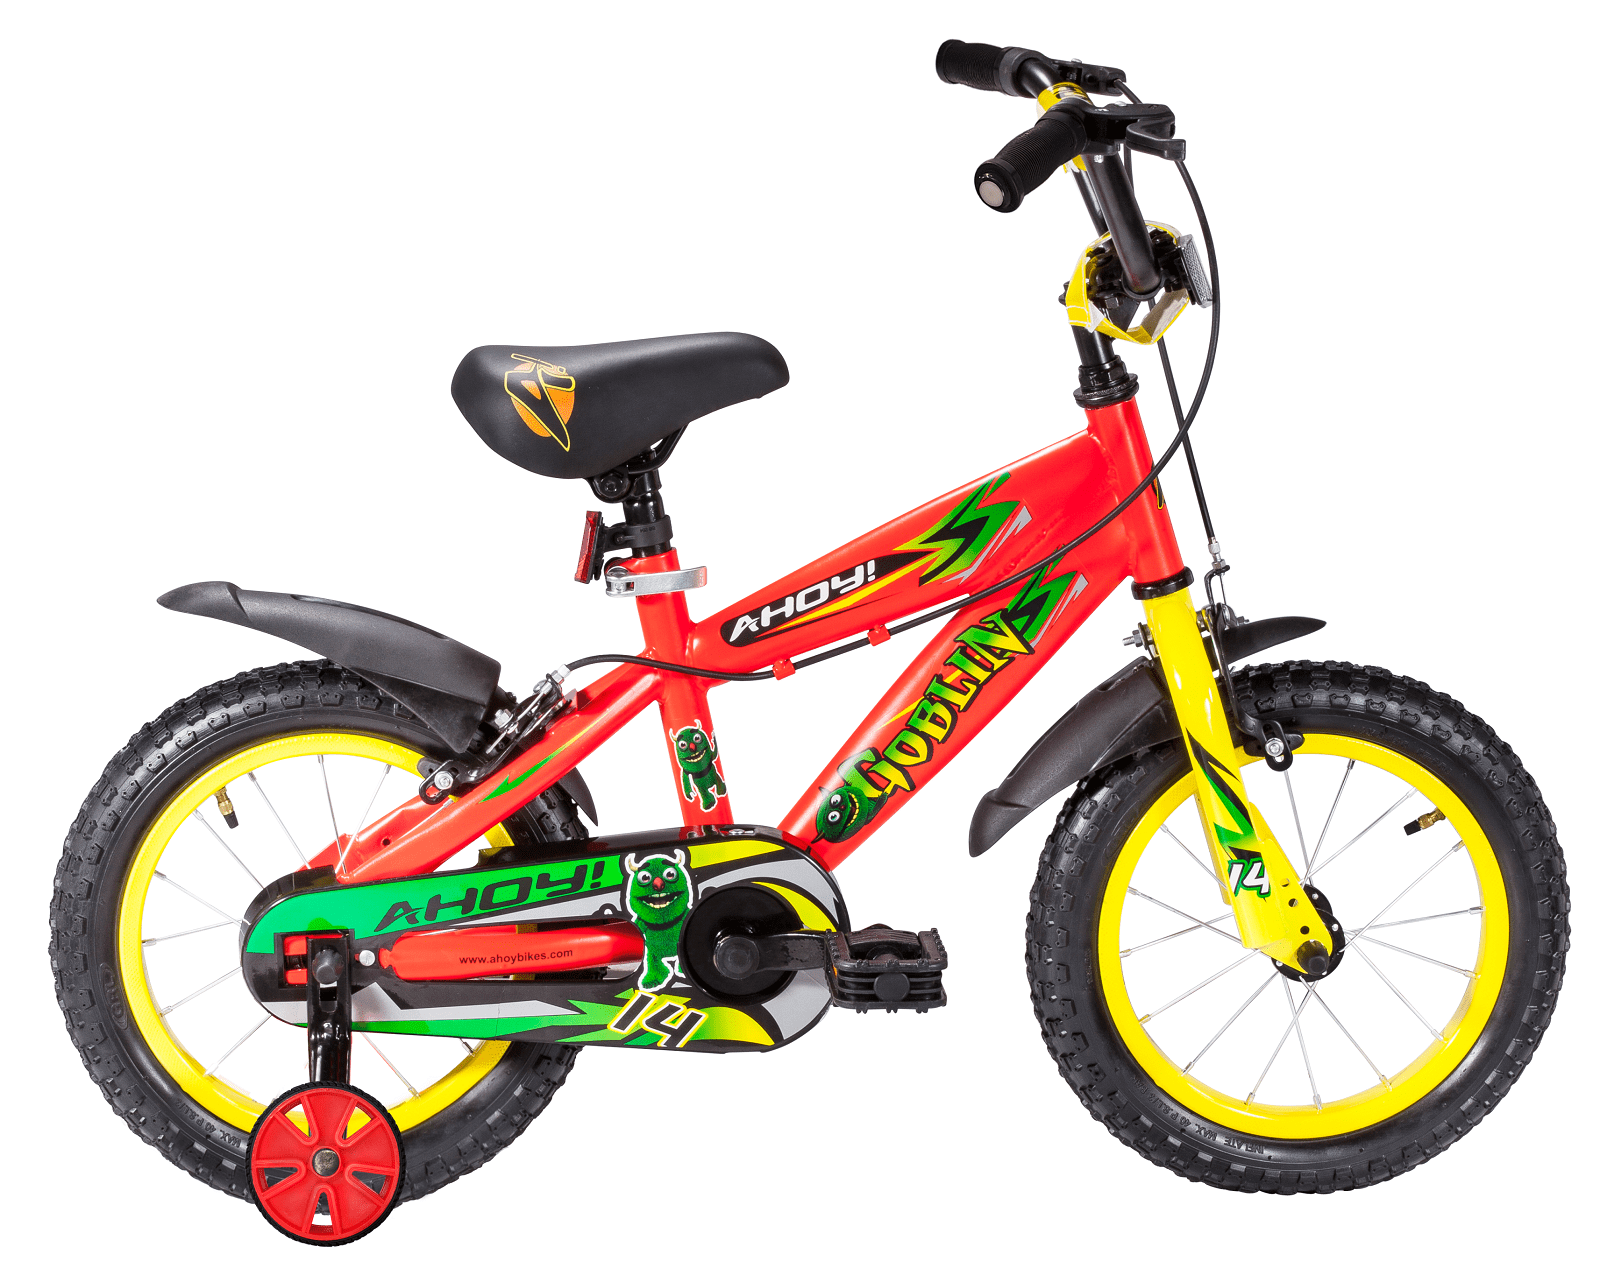 Goblin Cycle for 5 Year Kids 14T | Buy red non gear cycle for kids